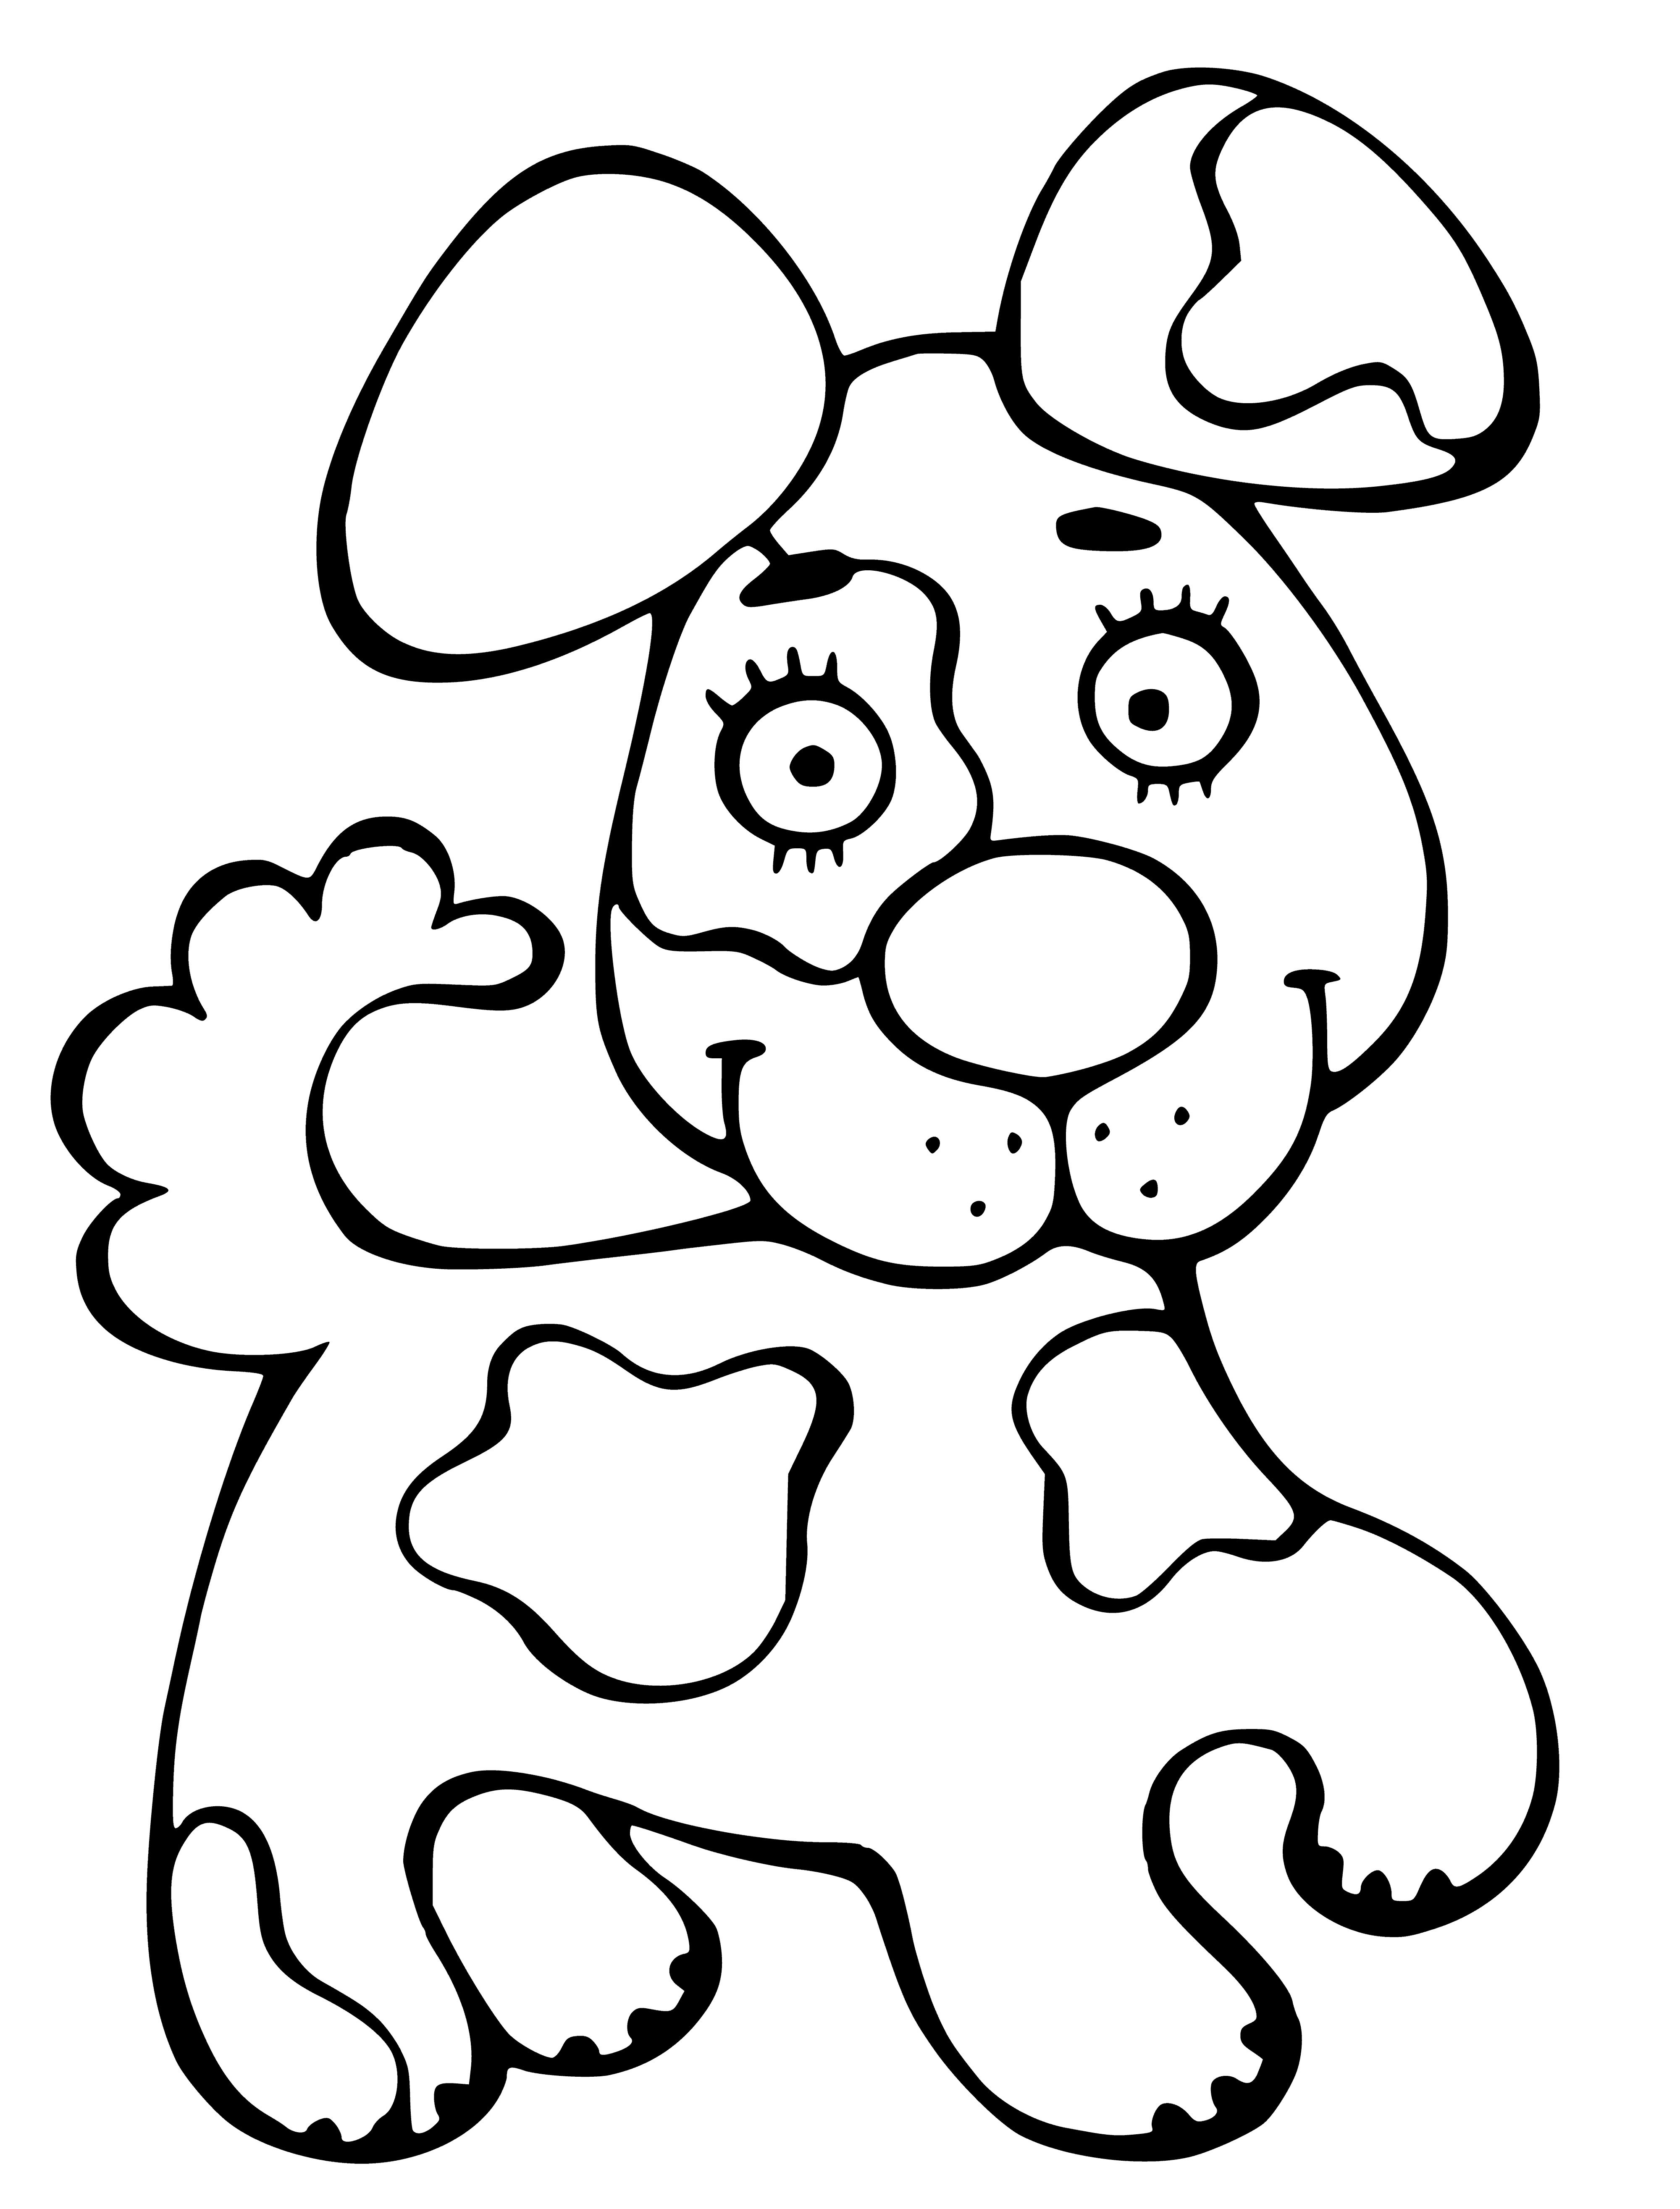 coloring page: A dog is a four-legged, furry friend who loves to play and has floppy ears and a tail.